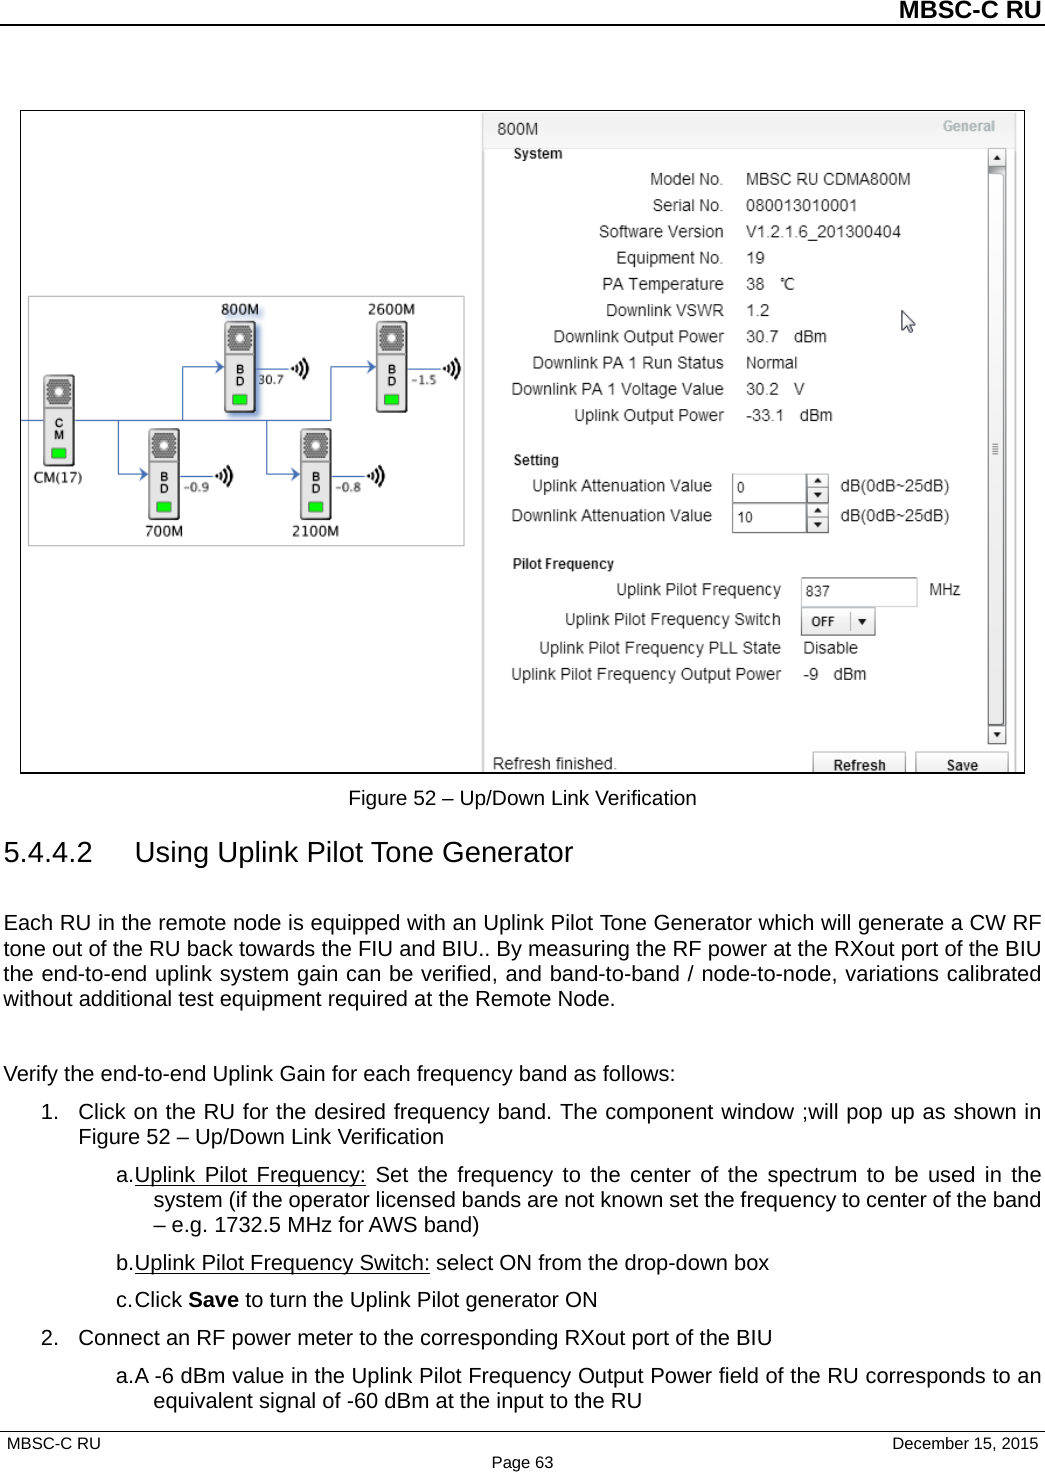          MBSC-C RU   MBSC-C RU                                     December 15, 2015 Page 63  Figure 52 – Up/Down Link Verification 5.4.4.2 Using Uplink Pilot Tone Generator Each RU in the remote node is equipped with an Uplink Pilot Tone Generator which will generate a CW RF tone out of the RU back towards the FIU and BIU.. By measuring the RF power at the RXout port of the BIU the end-to-end uplink system gain can be verified, and band-to-band / node-to-node, variations calibrated without additional test equipment required at the Remote Node.  Verify the end-to-end Uplink Gain for each frequency band as follows: 1. Click on the RU for the desired frequency band. The component window ;will pop up as shown in Figure 52 – Up/Down Link Verification a. Uplink Pilot Frequency: Set the frequency to the center of the spectrum to be used in the system (if the operator licensed bands are not known set the frequency to center of the band – e.g. 1732.5 MHz for AWS band) b. Uplink Pilot Frequency Switch: select ON from the drop-down box c. Click Save to turn the Uplink Pilot generator ON 2. Connect an RF power meter to the corresponding RXout port of the BIU a. A -6 dBm value in the Uplink Pilot Frequency Output Power field of the RU corresponds to an equivalent signal of -60 dBm at the input to the RU 